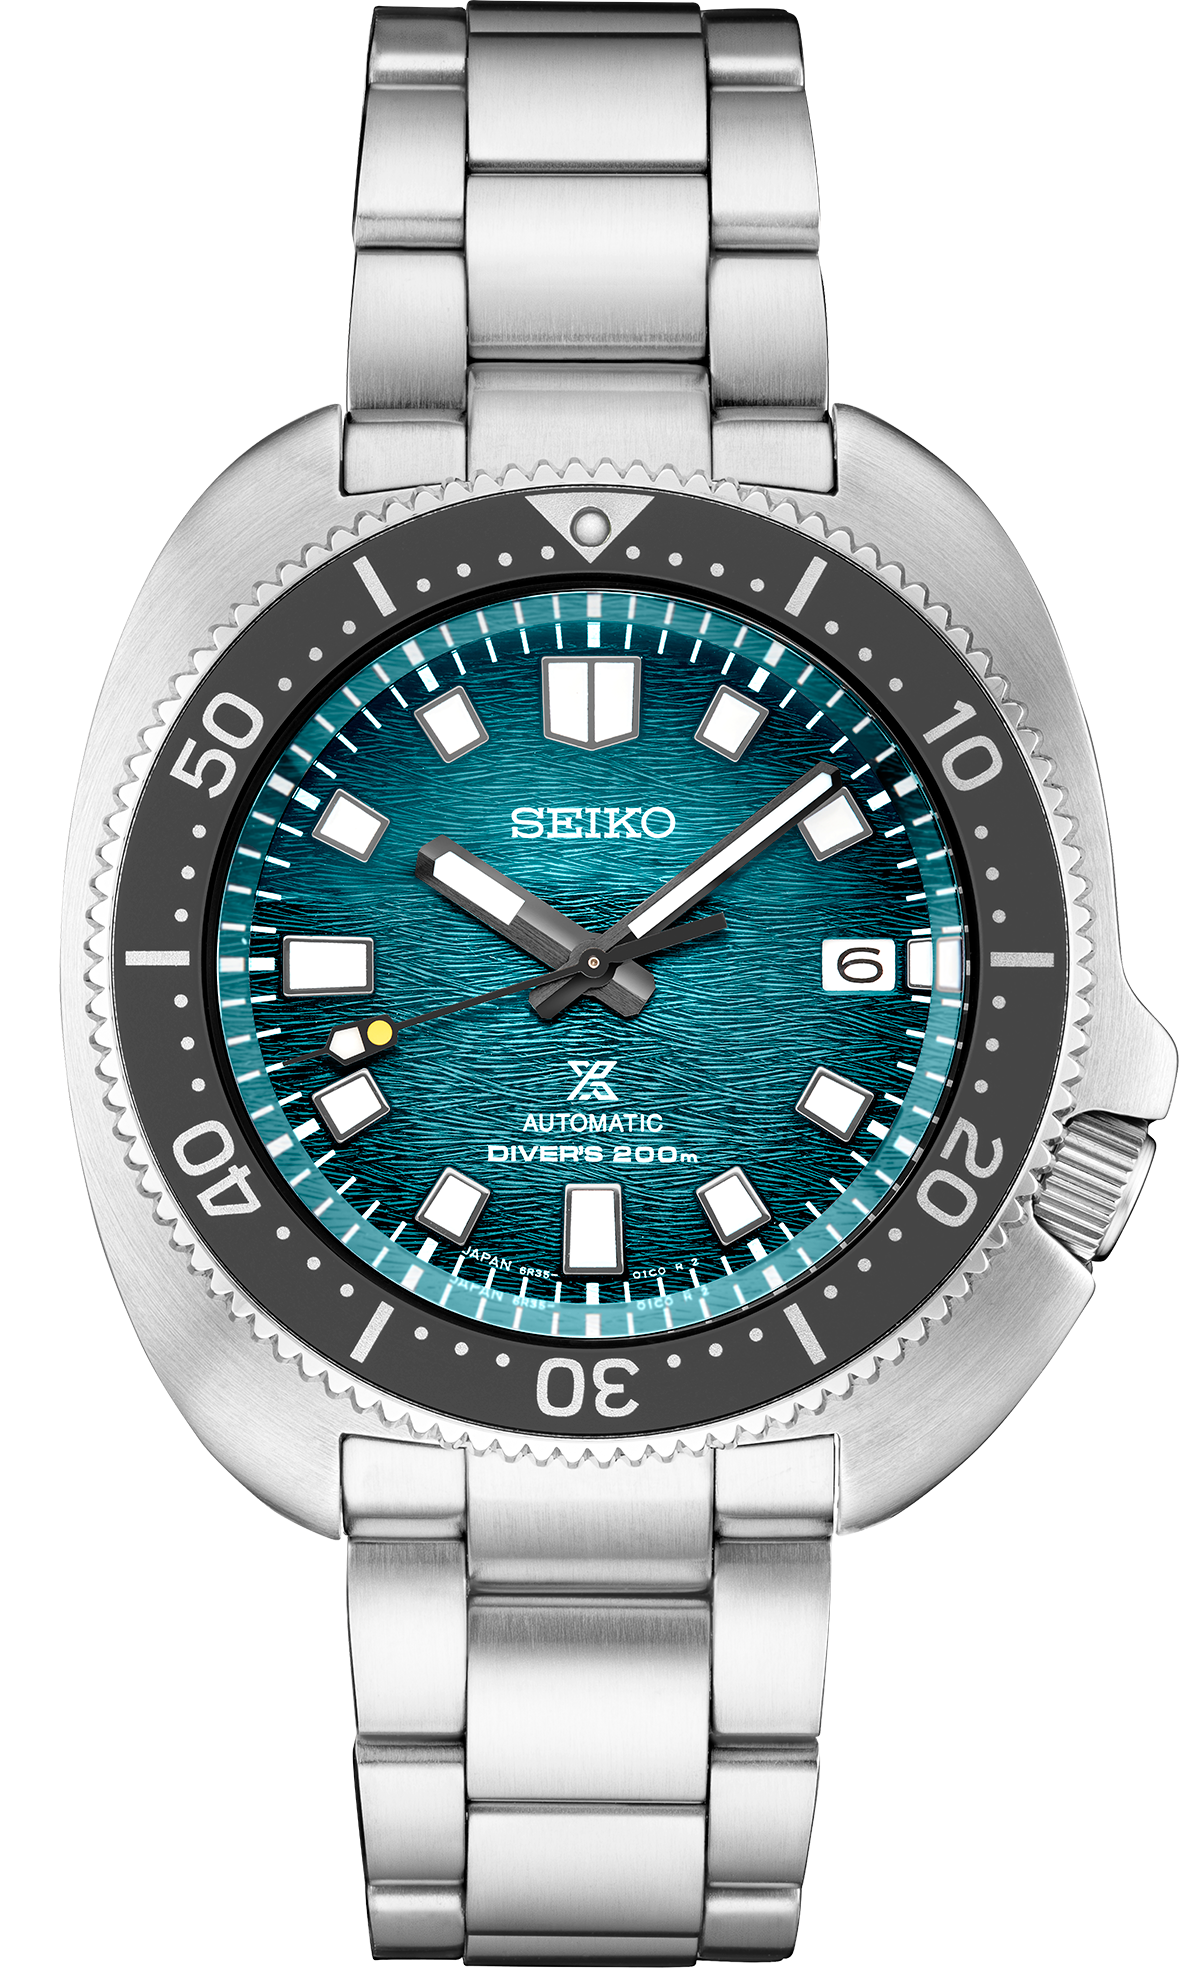 SPB265 PROSPEX BUILT FOR THE ICE DIVER U.S. SPECIAL EDITION